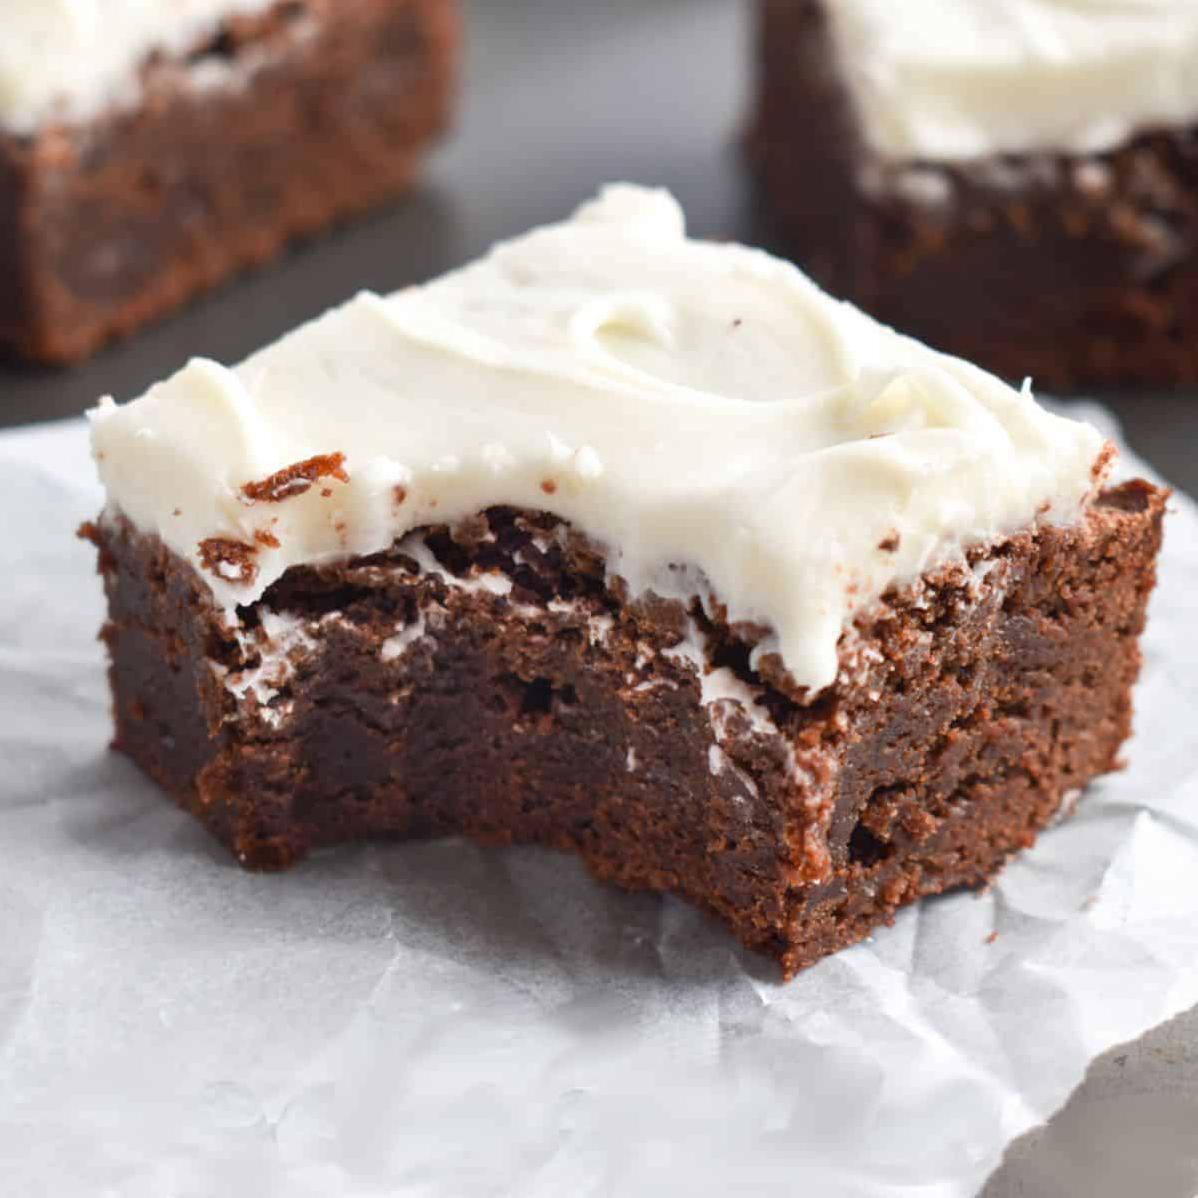  Decadent coffee brownies with a swirl of cream cheese frosting on top.